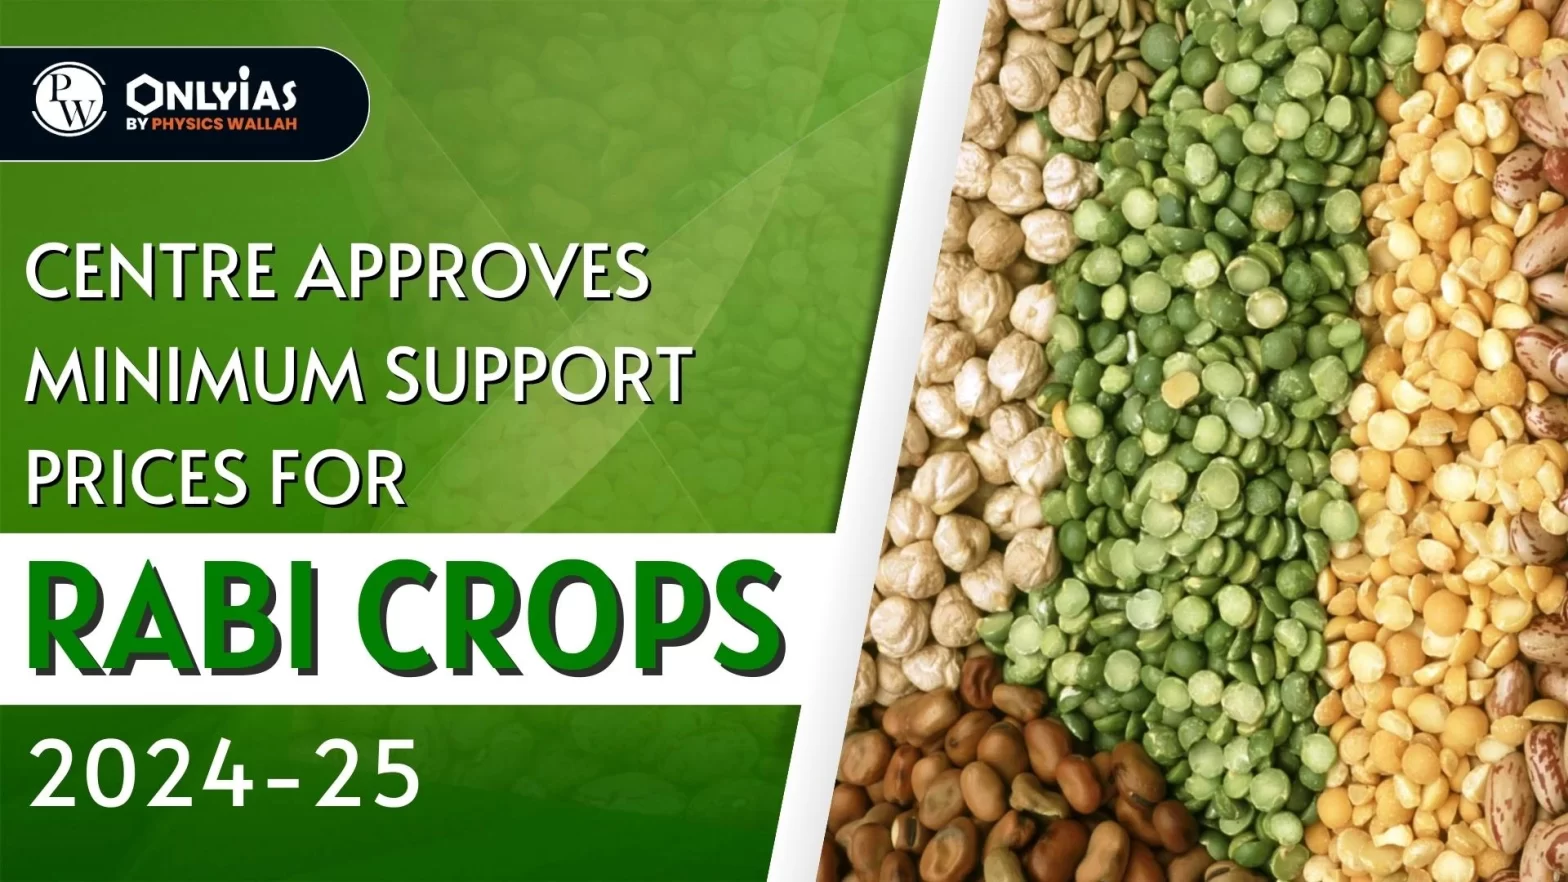 Centre Approves Minimum Support Prices for Rabi Crops 2024-25